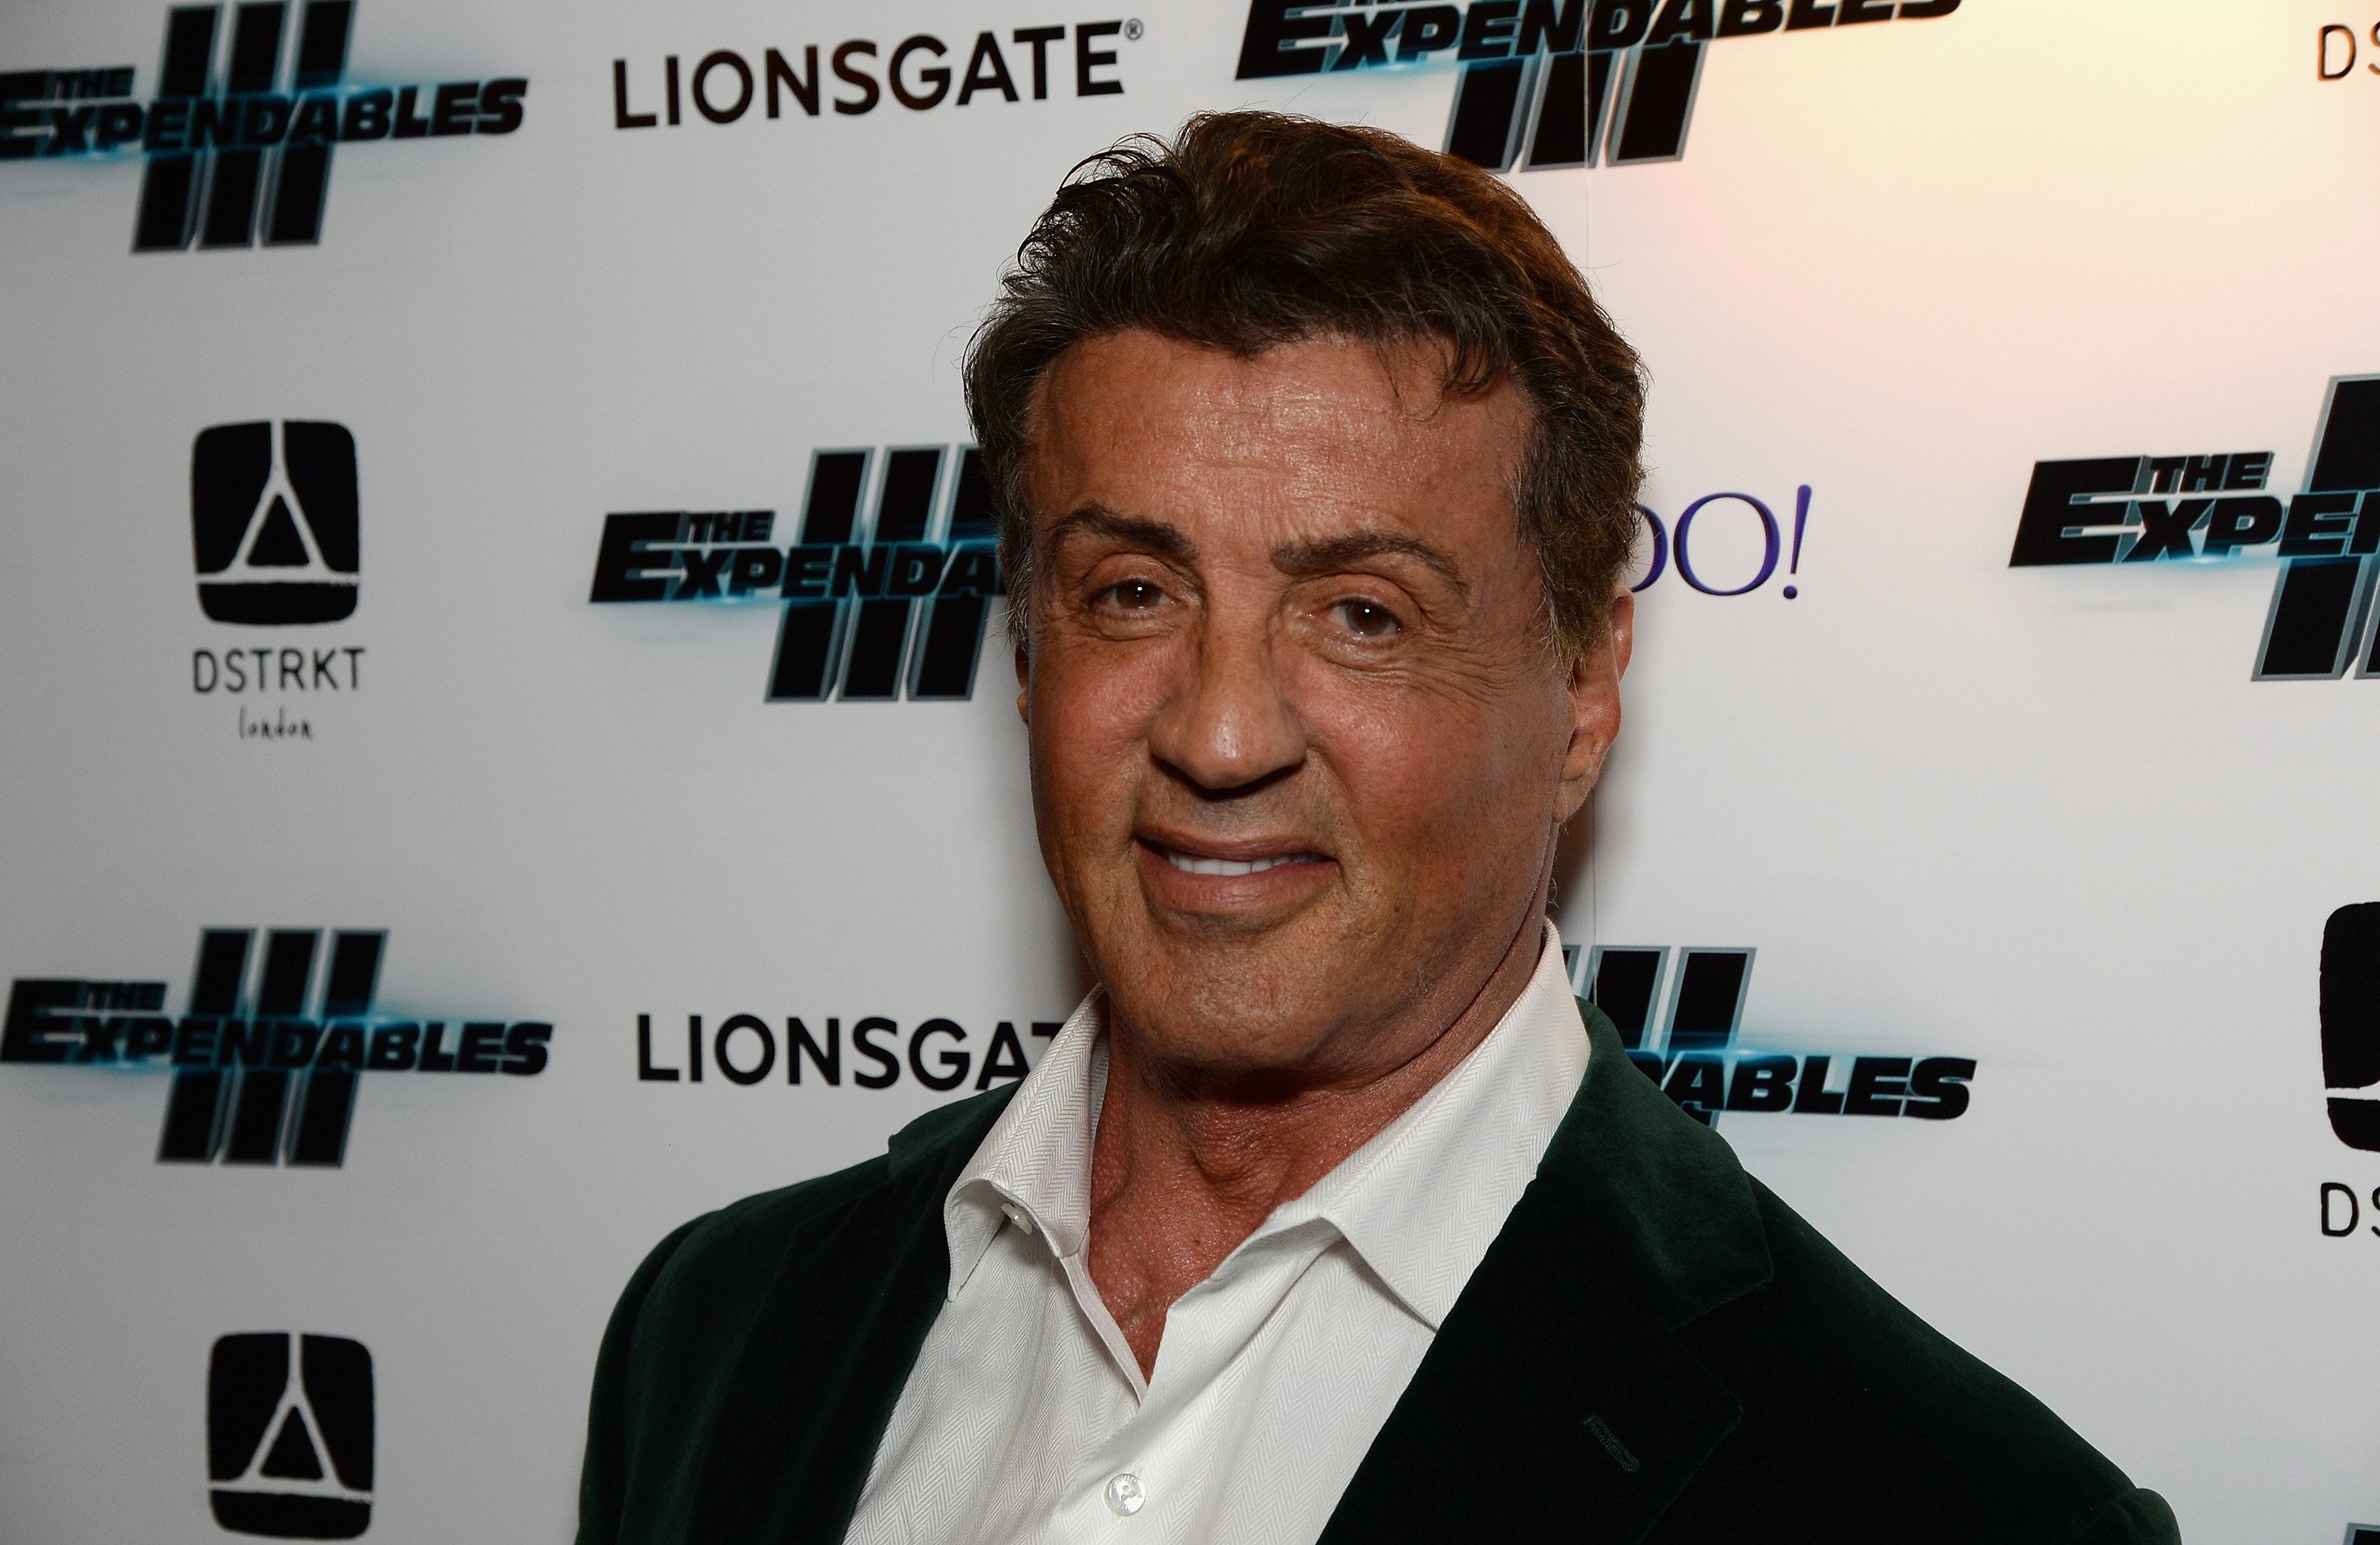 Legendary actor Sylvester Stallone attends the 2014 premiere night of the movie "Expendables III" in London. | Photo: Getty Images